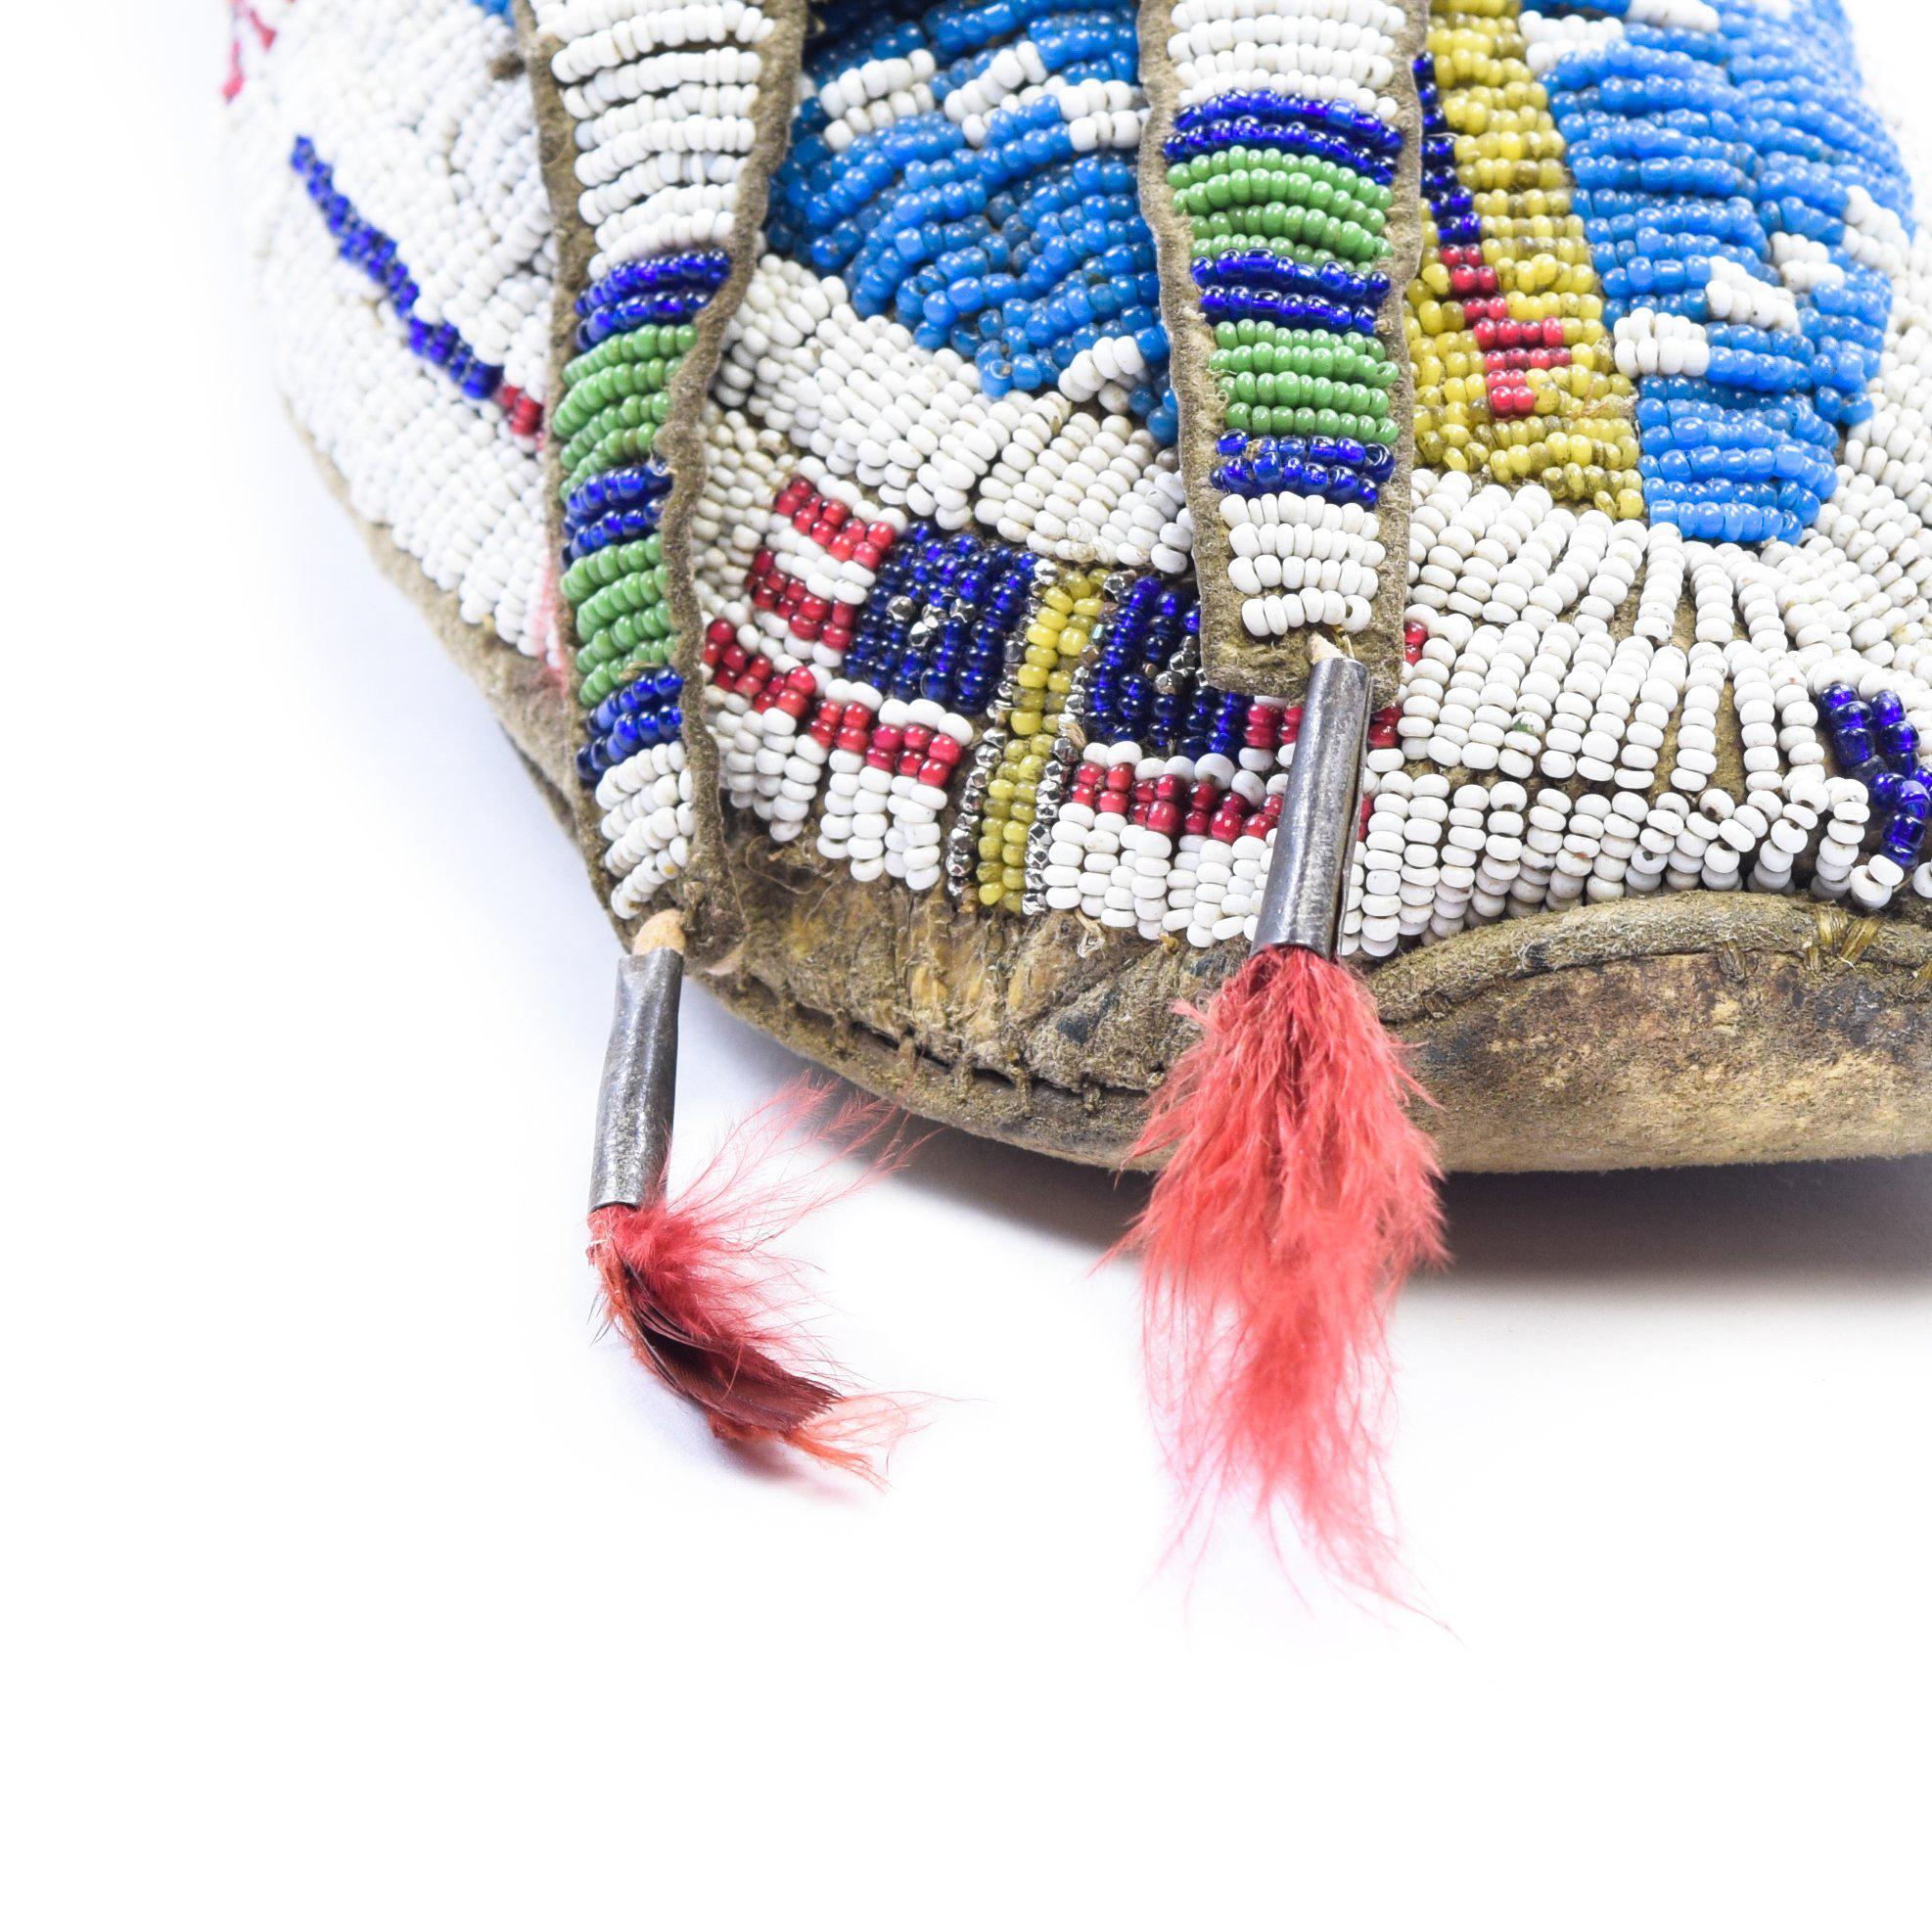 Stunning Sioux moccasins, beaded, primarily in blue and white, with flag motif and horse hair tuffs on tabs.

Period: circa 1880

Origin: Sioux, Plains

Size: 10 3/4